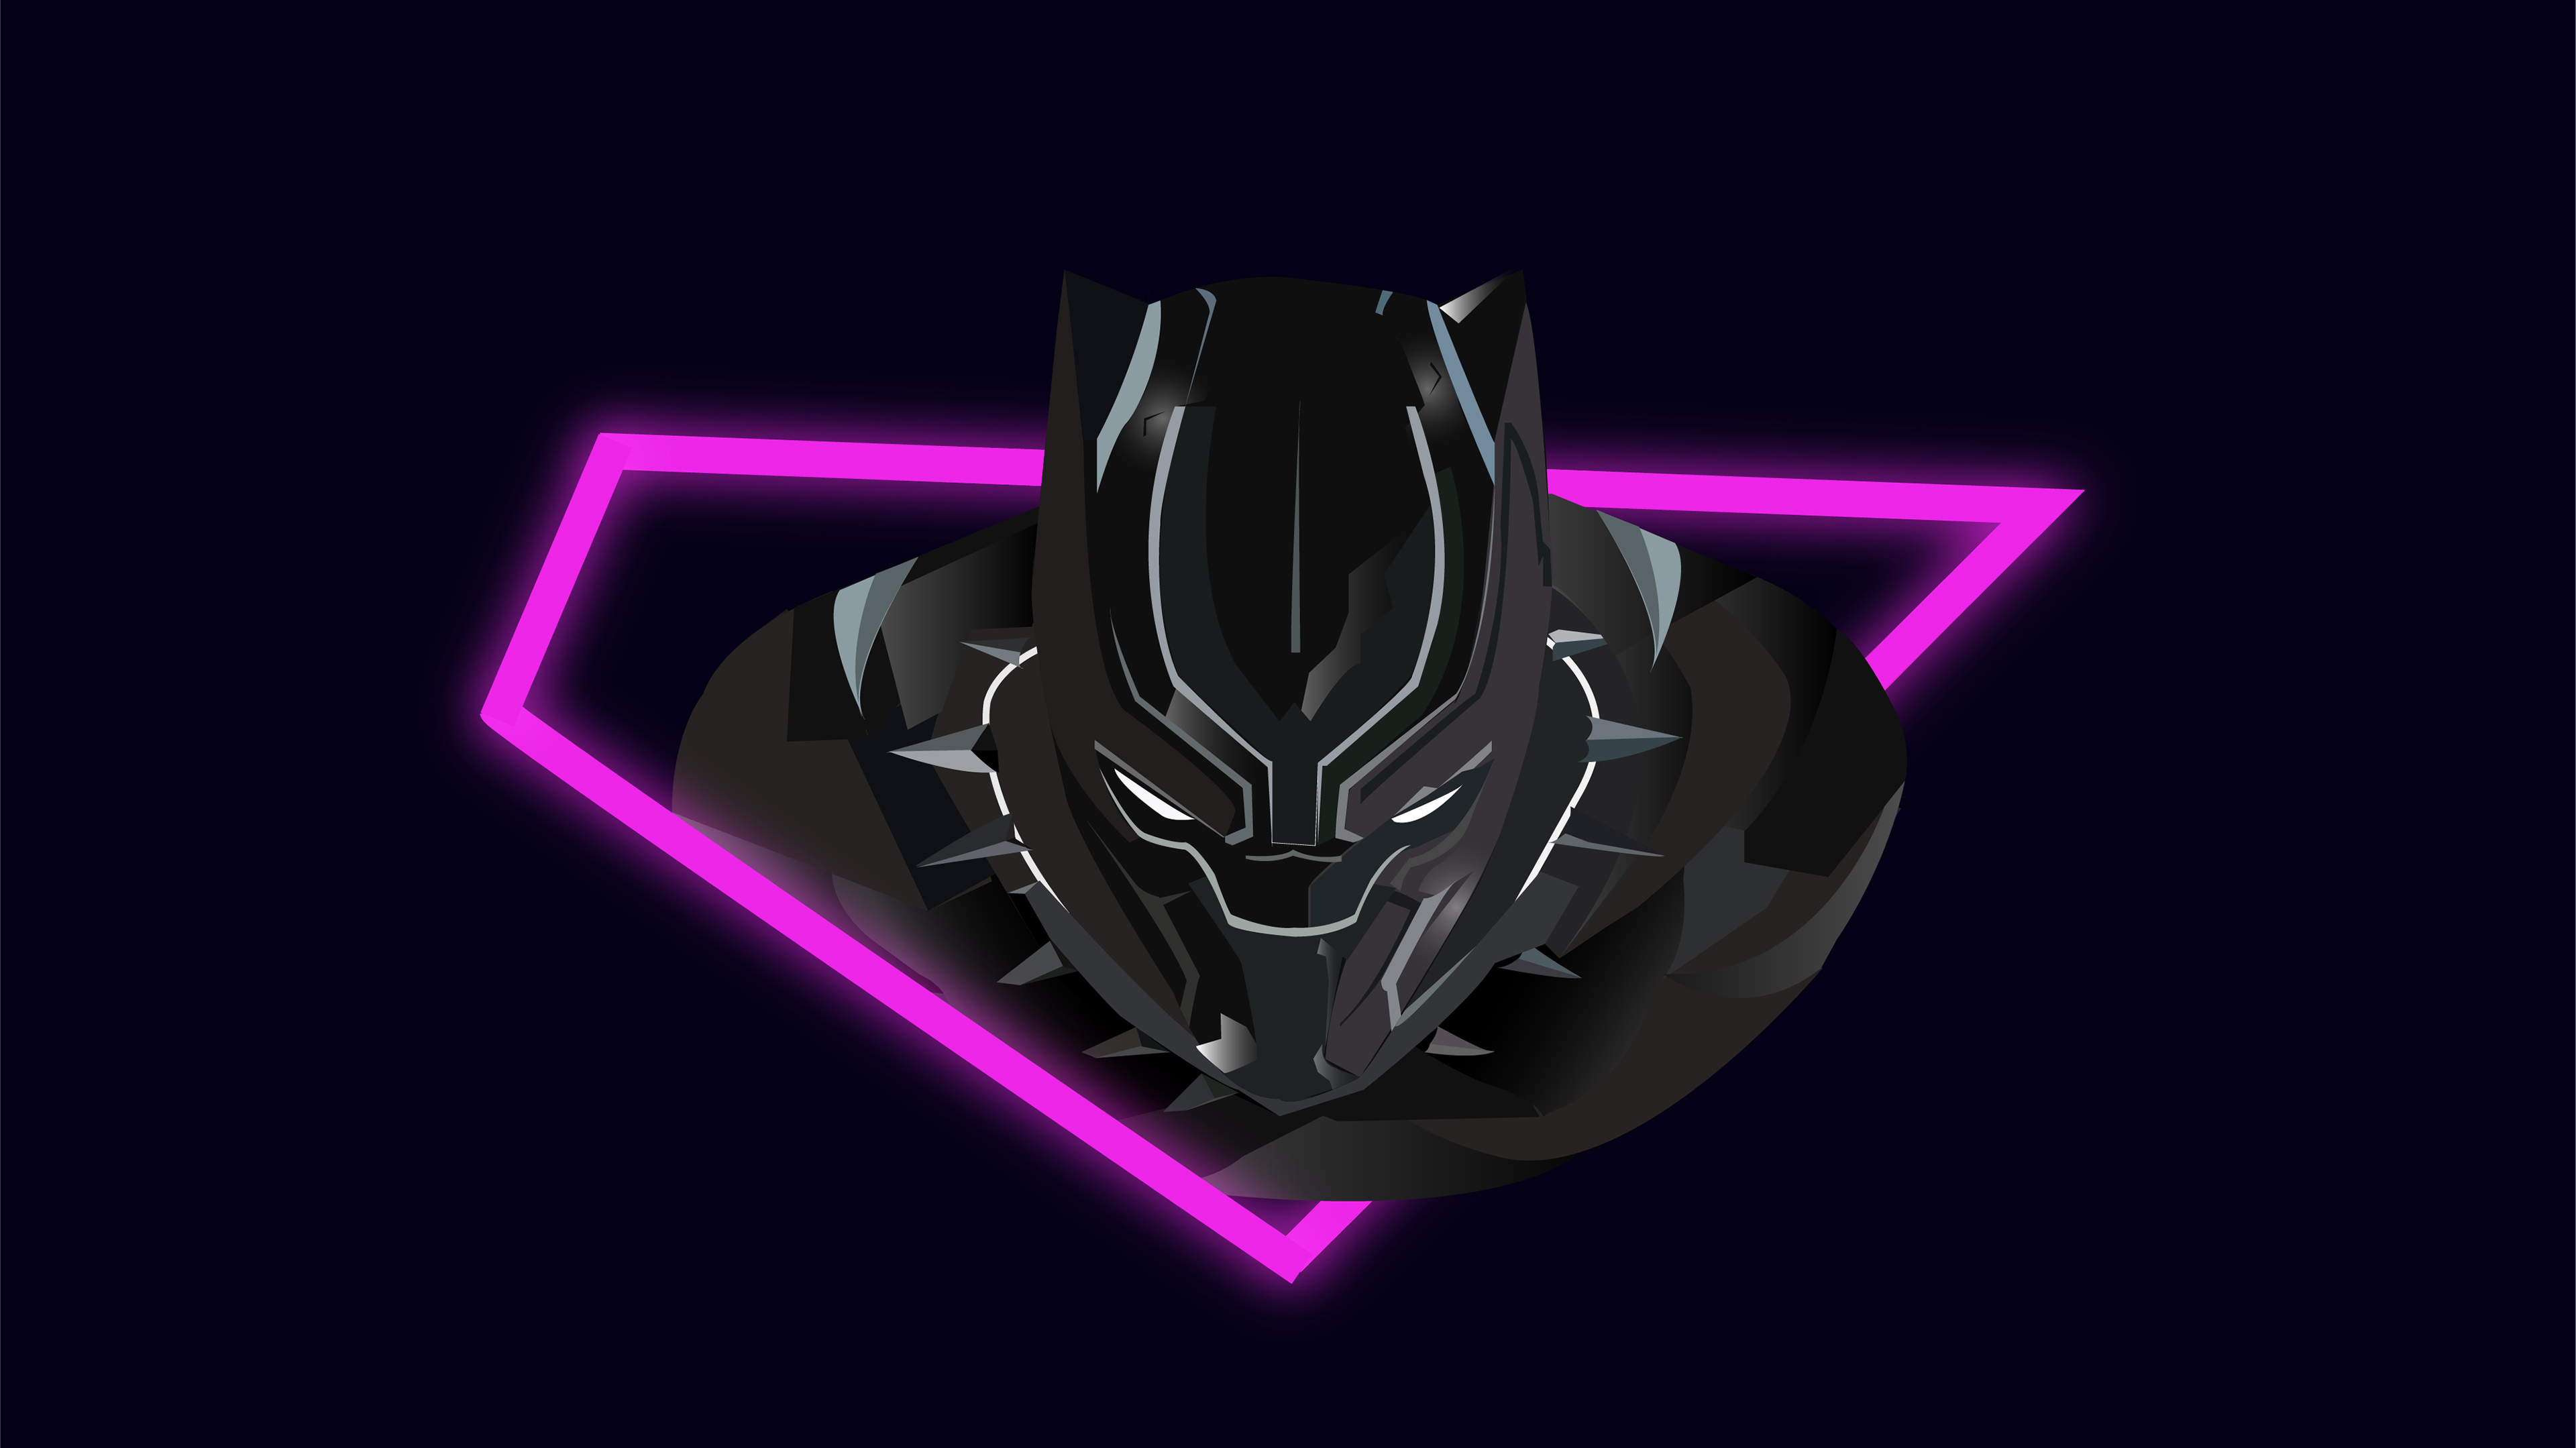 Black Panther for apple download free